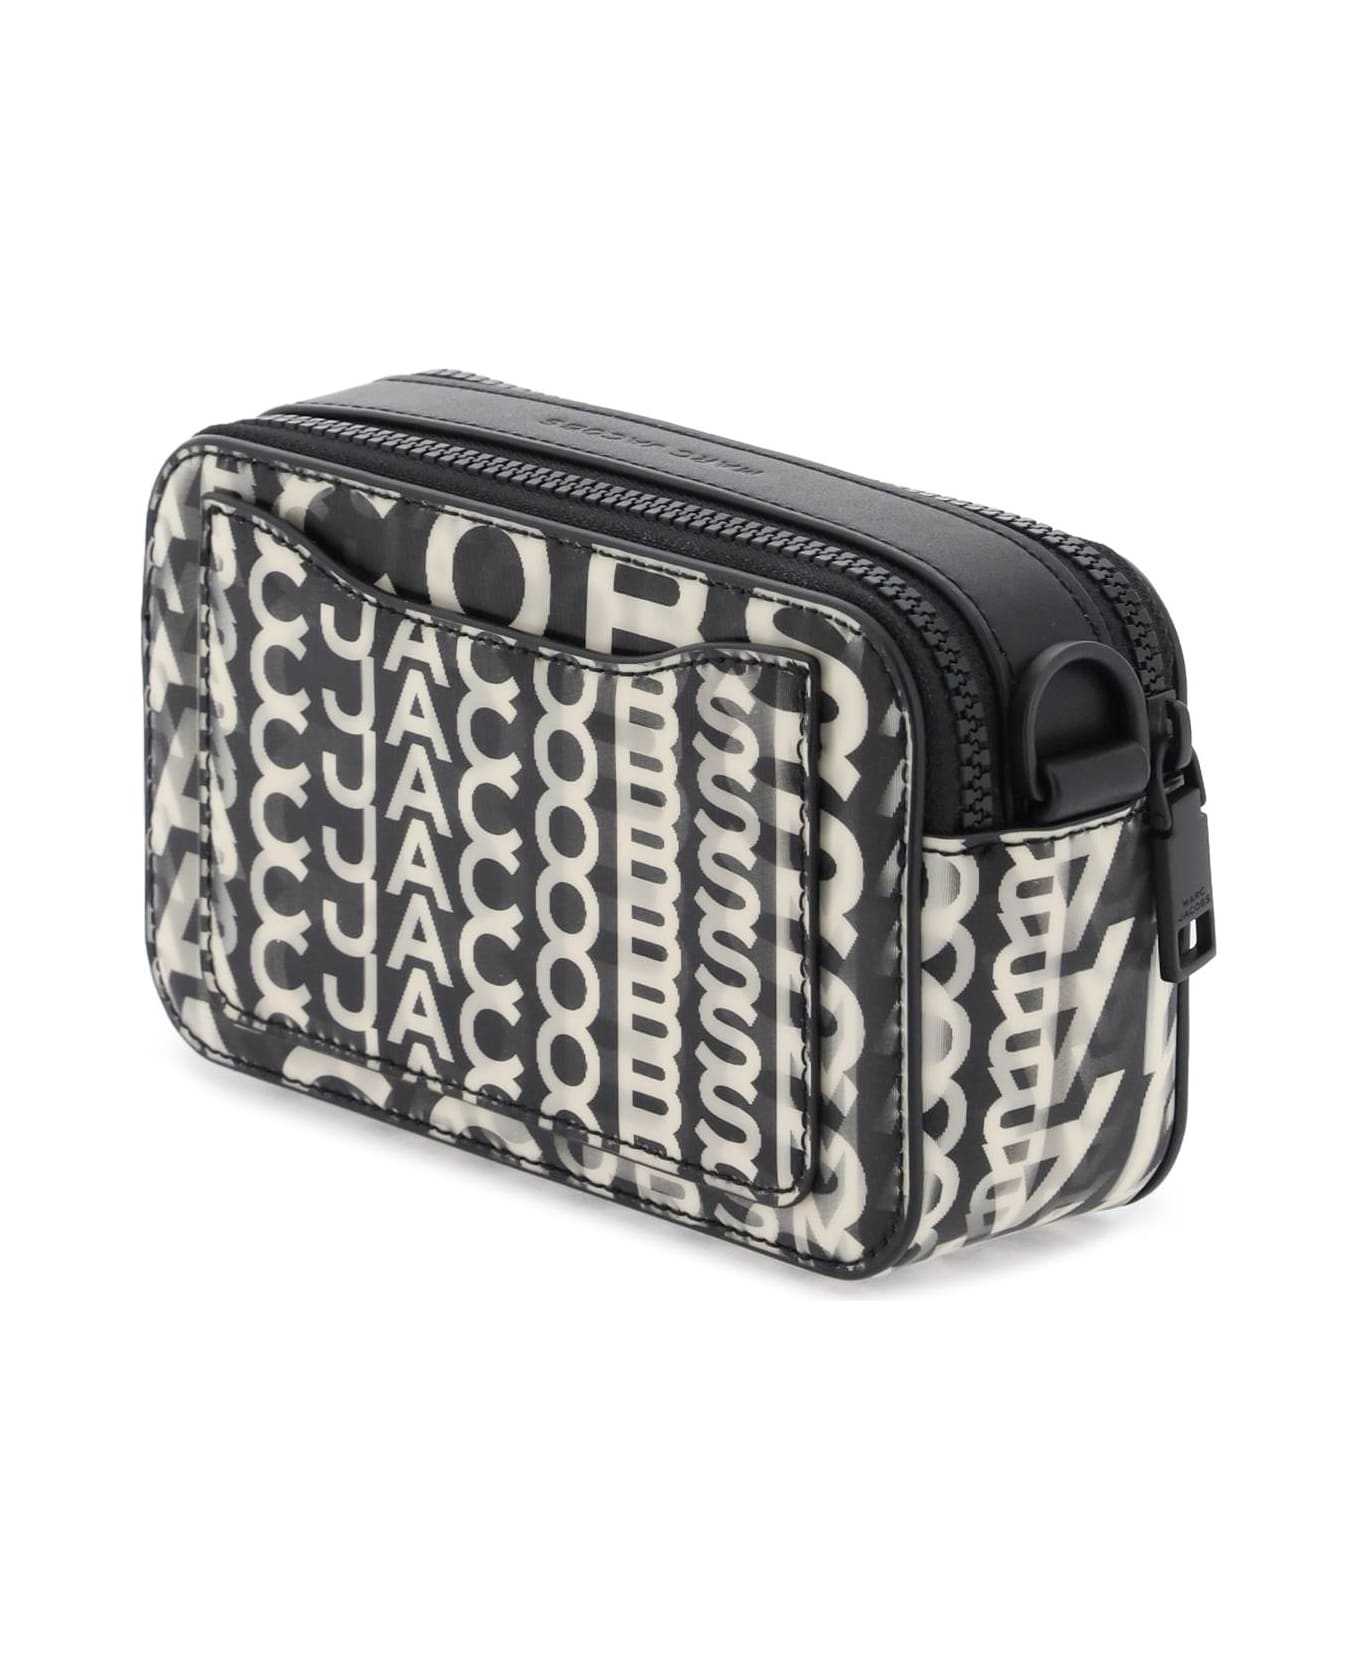 Marc Jacobs The Snapshot Bag With Lenticular Effect - BLACK WHITE (Black)